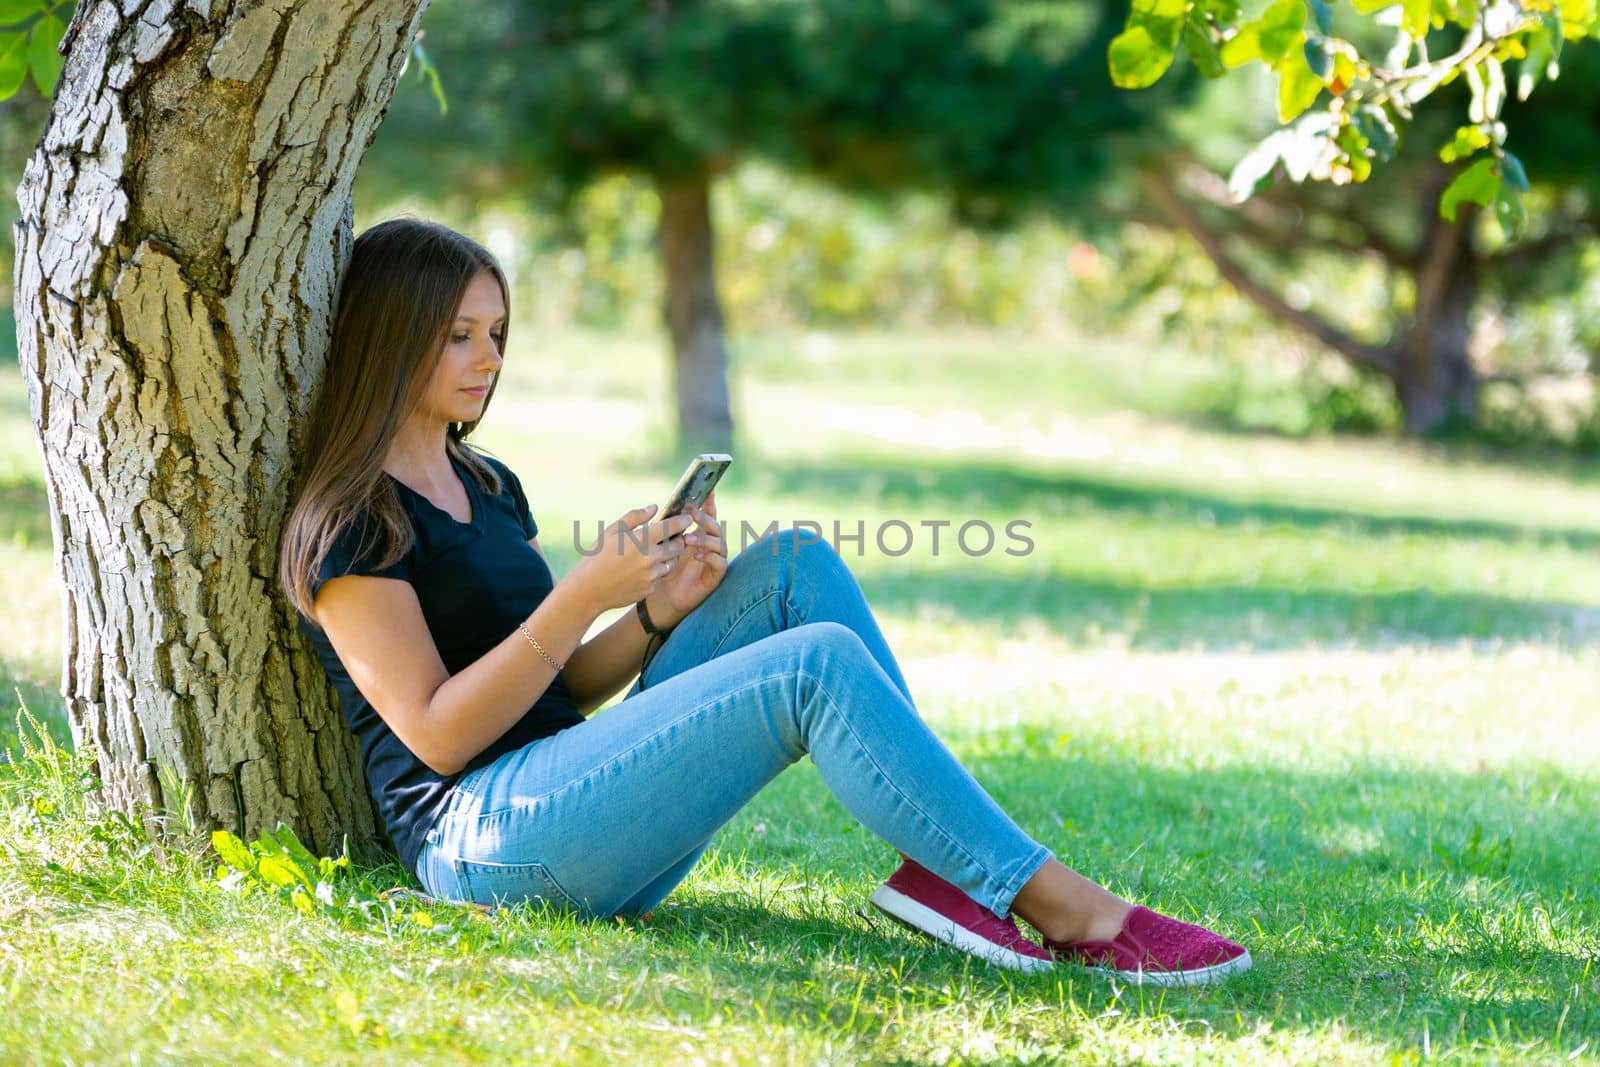 A girl sits under a tree in a sunny park and looks at the smartphone screen by Madhourse